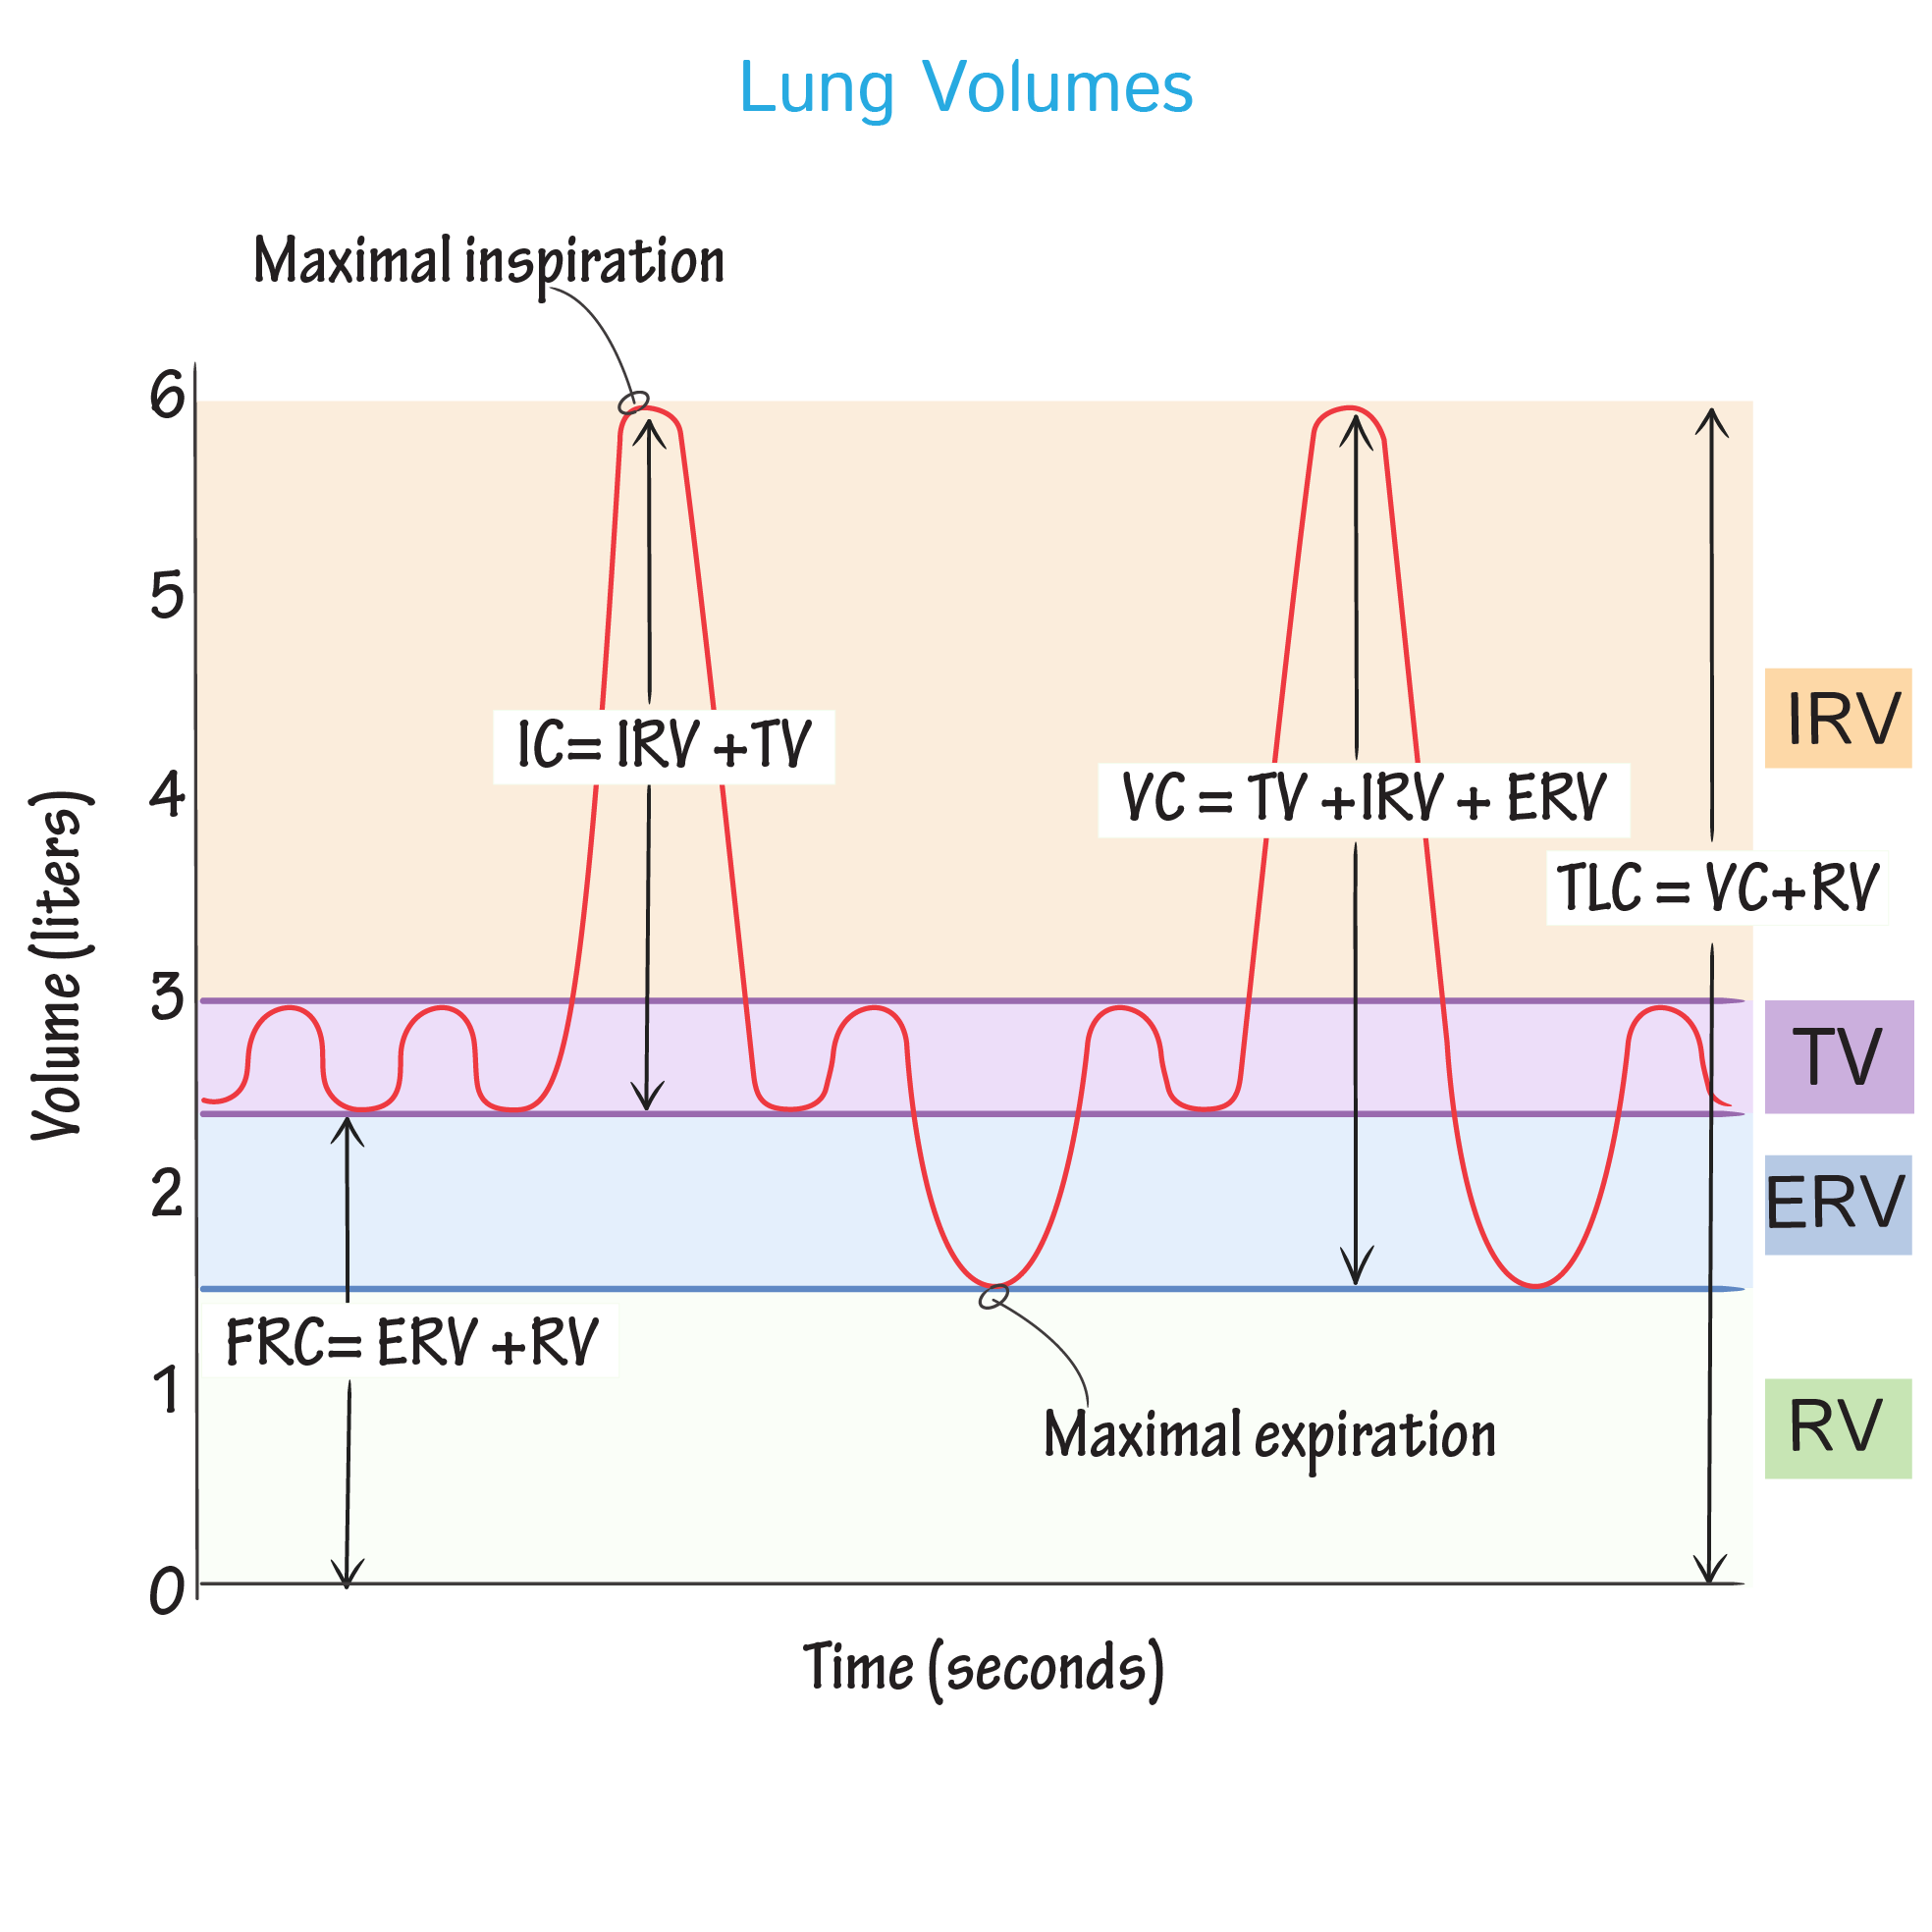 experiment using increased dead space and measuring different lung volumes